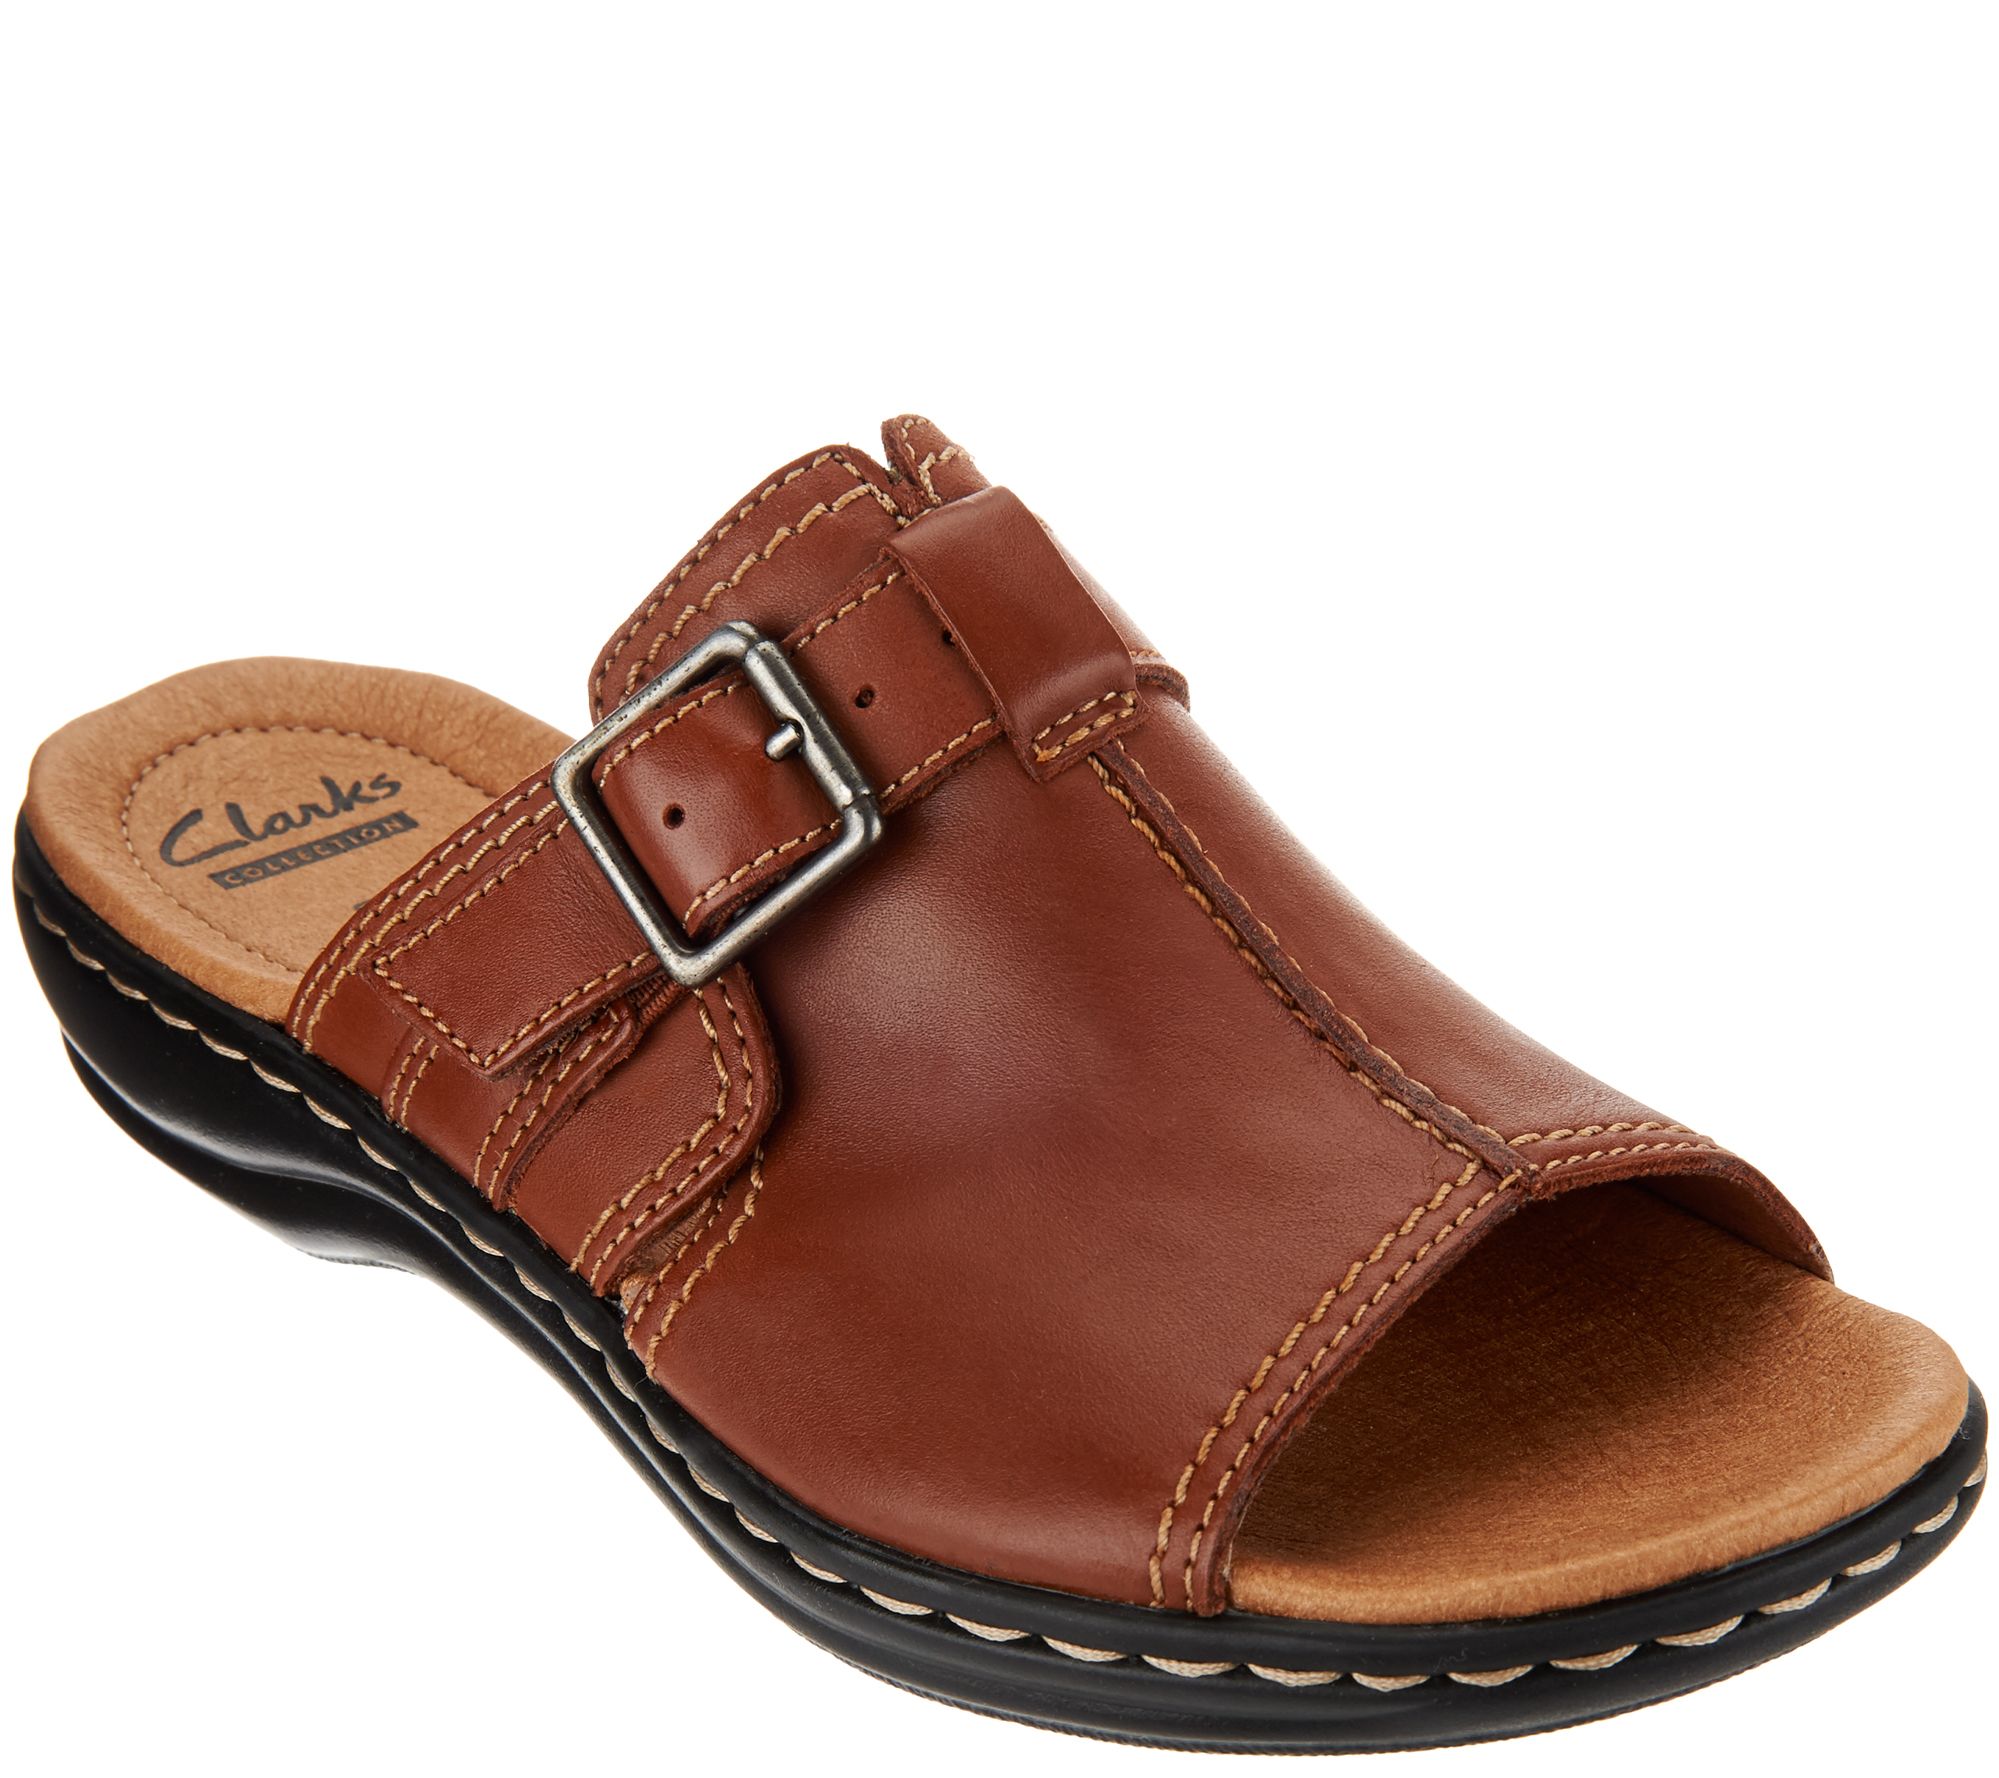 Clarks Leather Slip-on Sandals with Buckle Detail - Leisa Gianna - Page ...